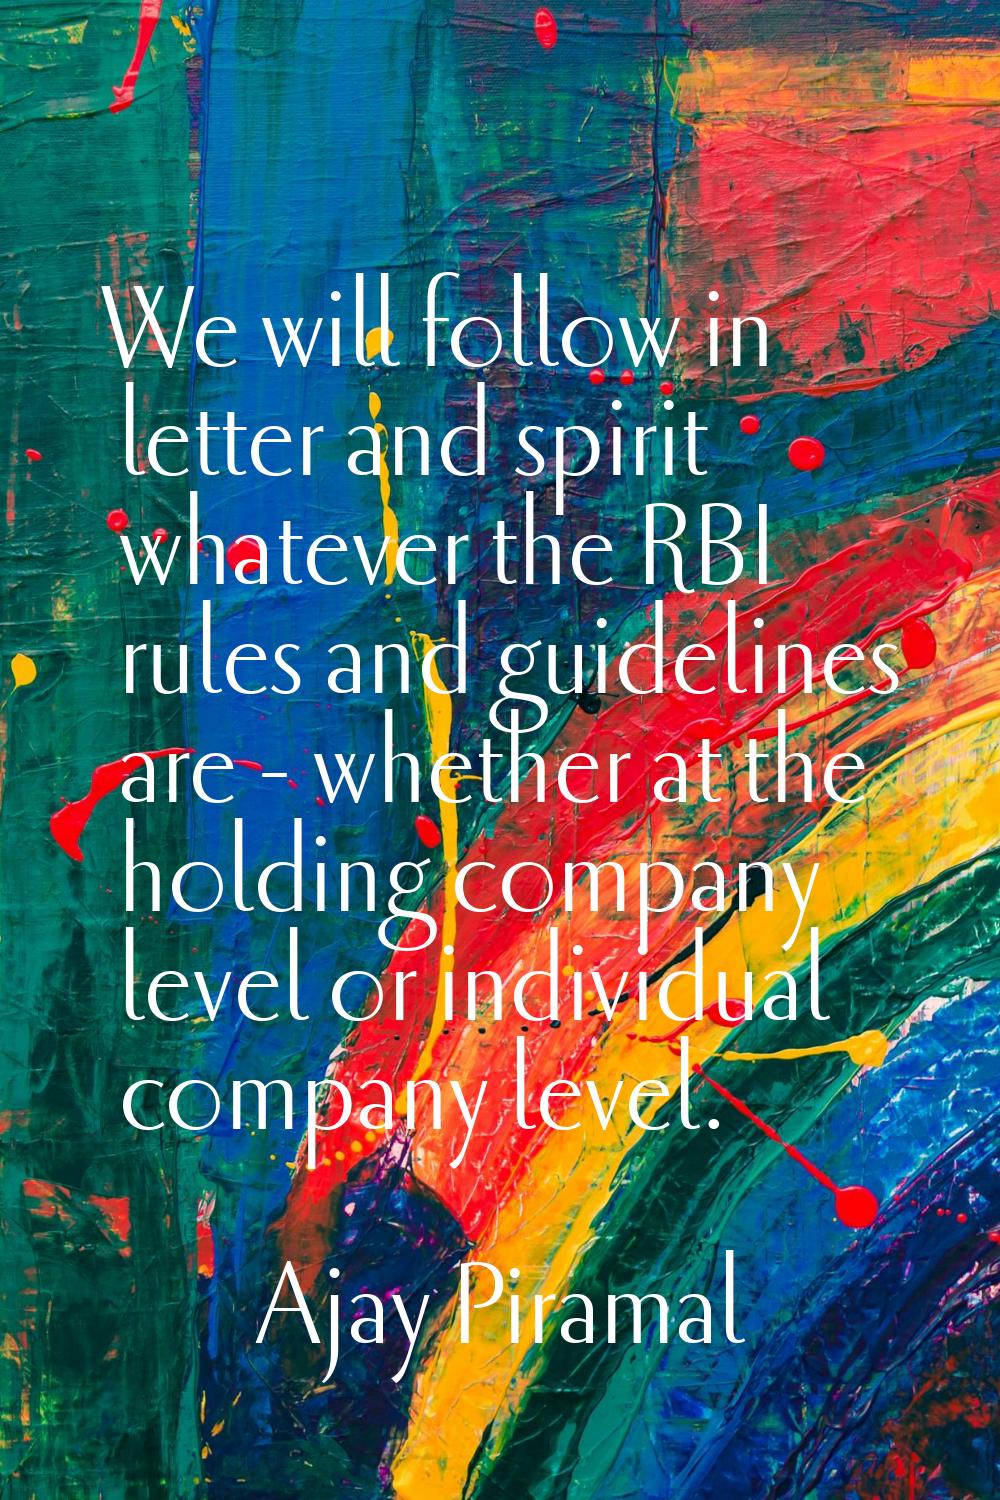 We will follow in letter and spirit whatever the RBI rules and guidelines are - whether at the hold